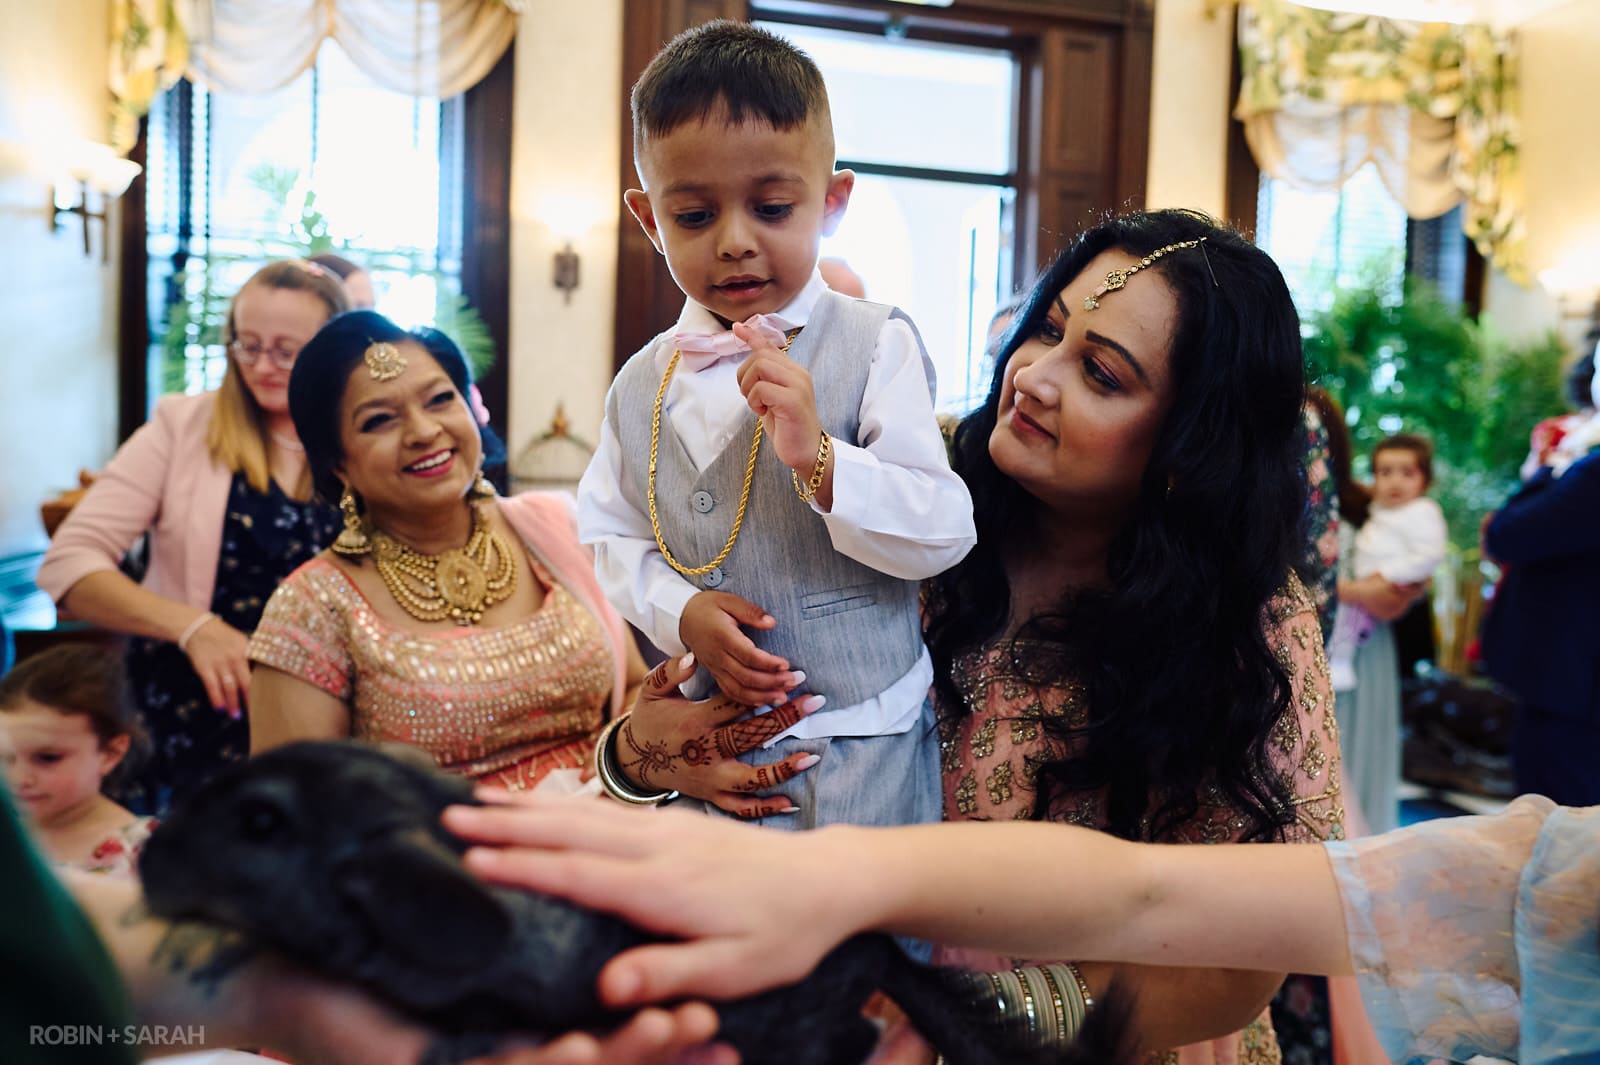 Guests pet animals at Spring Grove House wedding reception